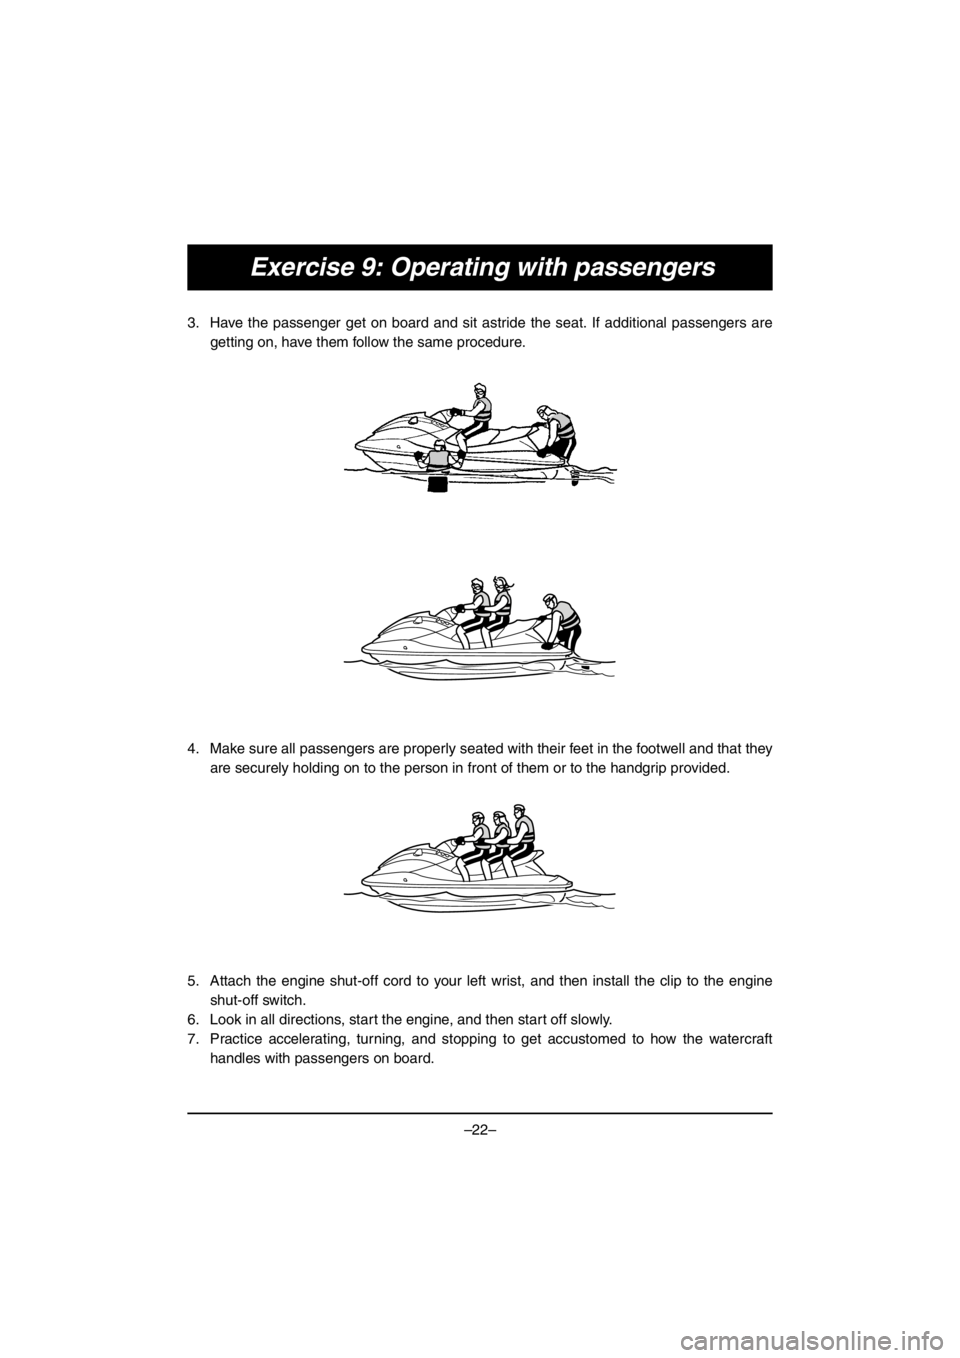 YAMAHA EX SPORT 2017  Notices Demploi (in French) –22–
Exercise 9: Operating with passengers
3. Have the passenger get on board and sit astride the seat. If additional passengers are
getting on, have them follow the same procedure. 
4. Make sure 